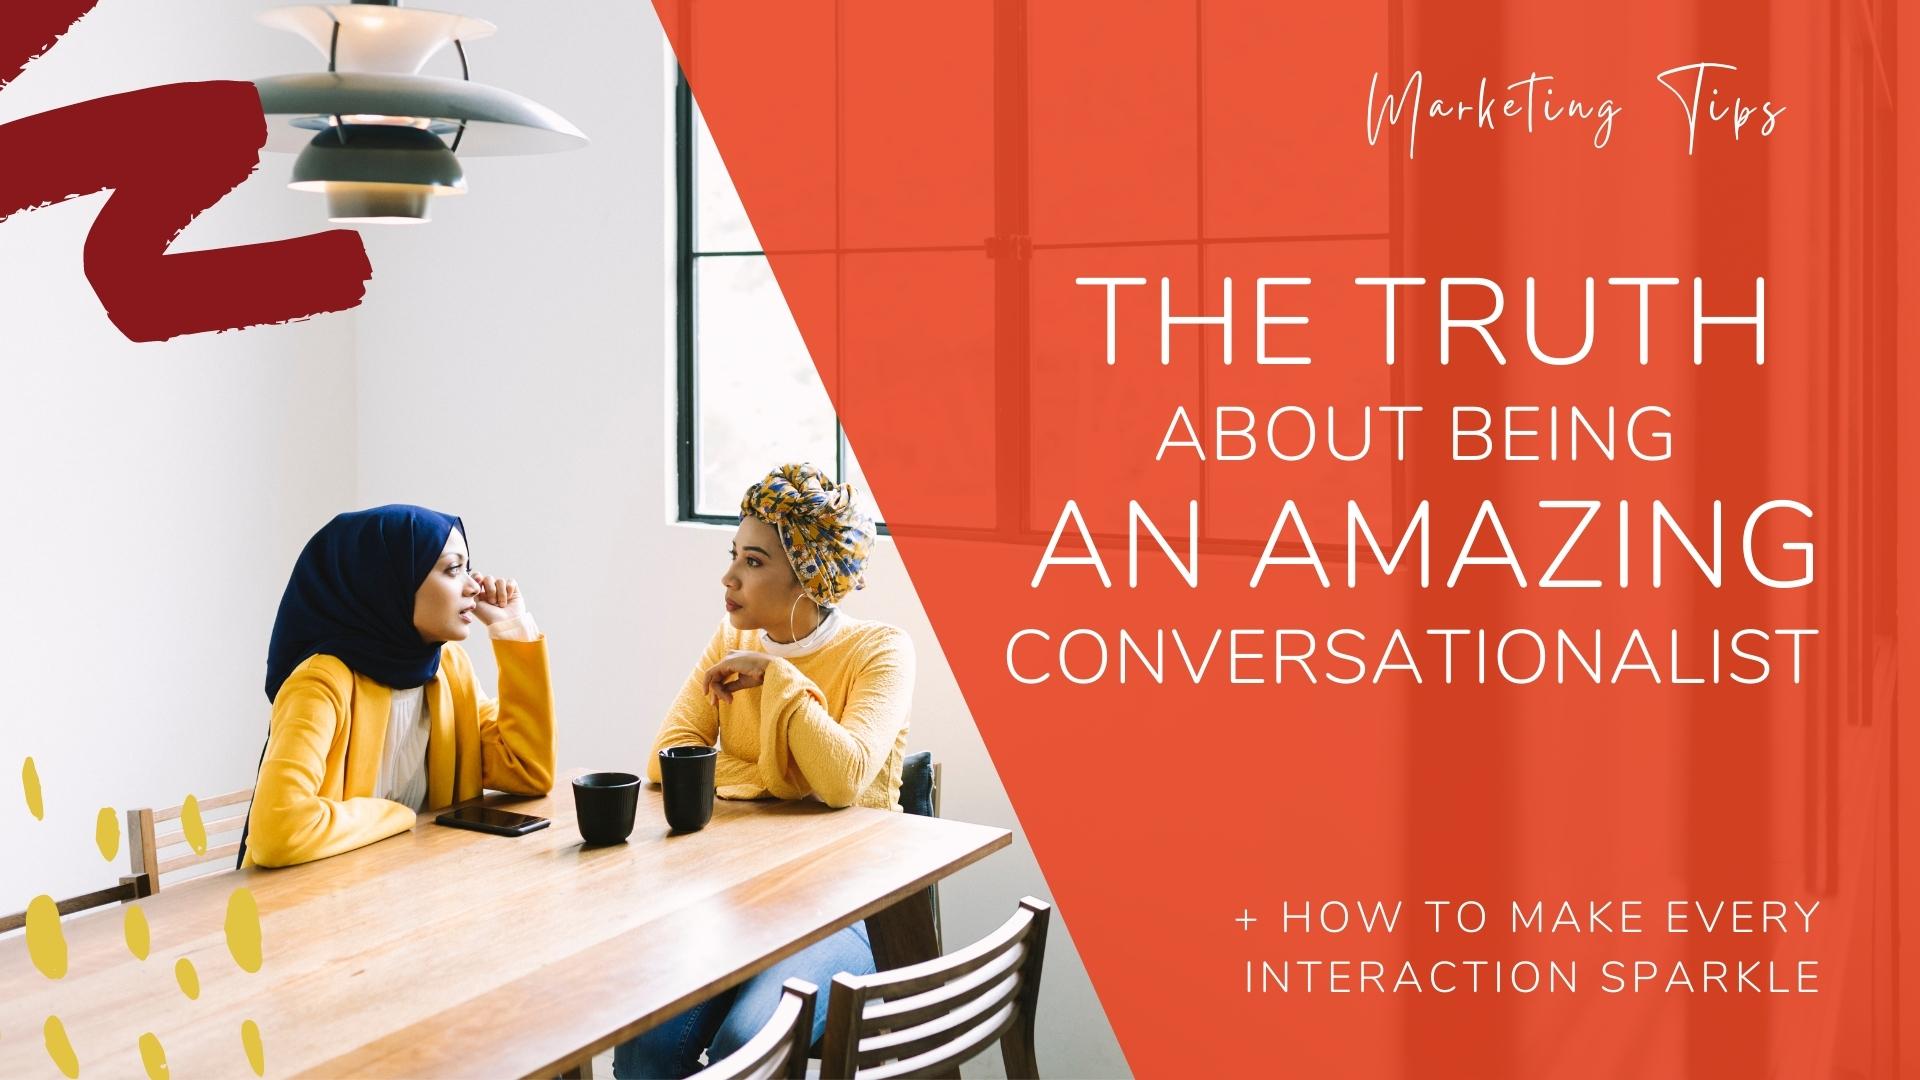 The Truth About Being an Amazing Conversationalist and How to Make Every Interaction Sparkle